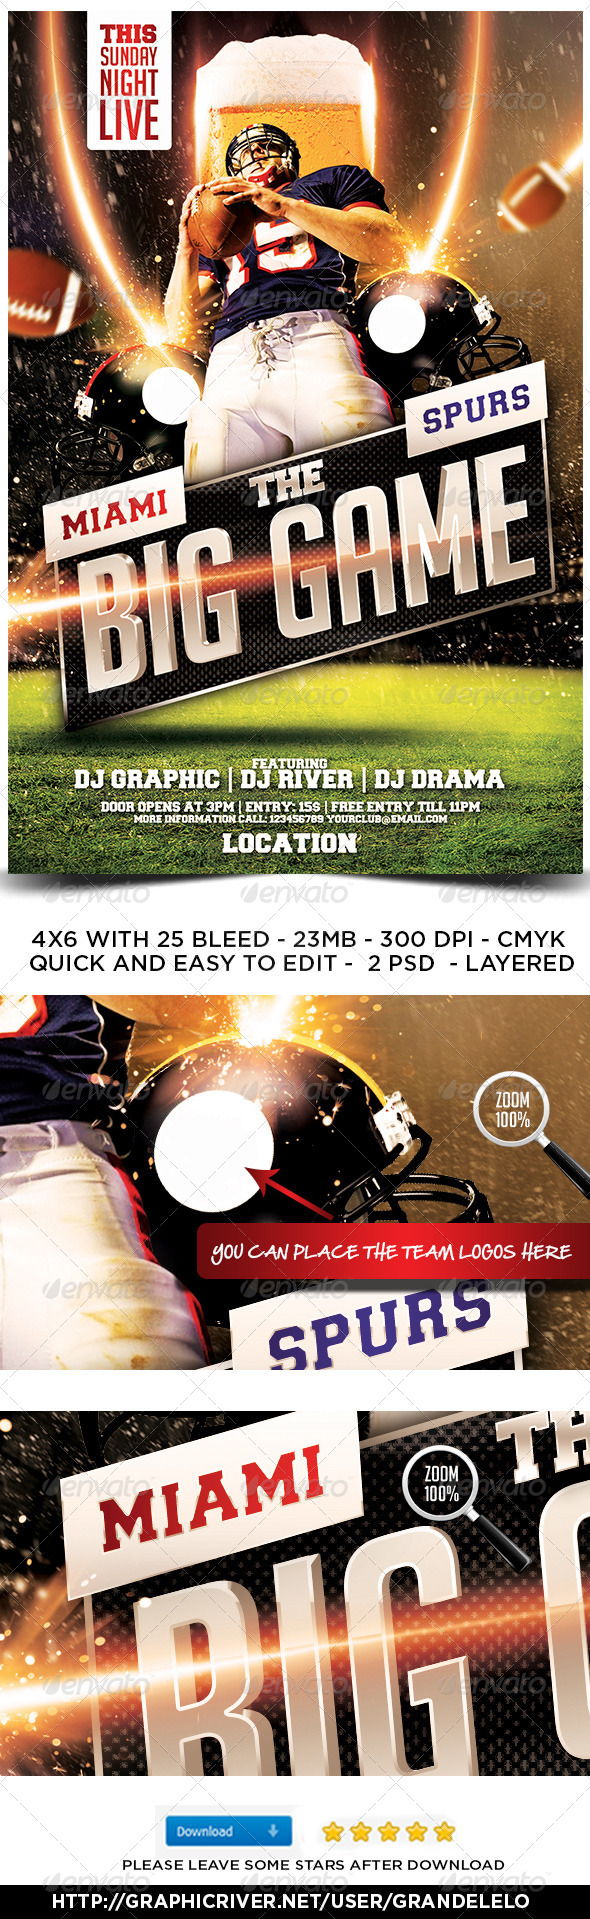 The Big Game Football Flyer 2 0 By Grandelelo Graphicriver